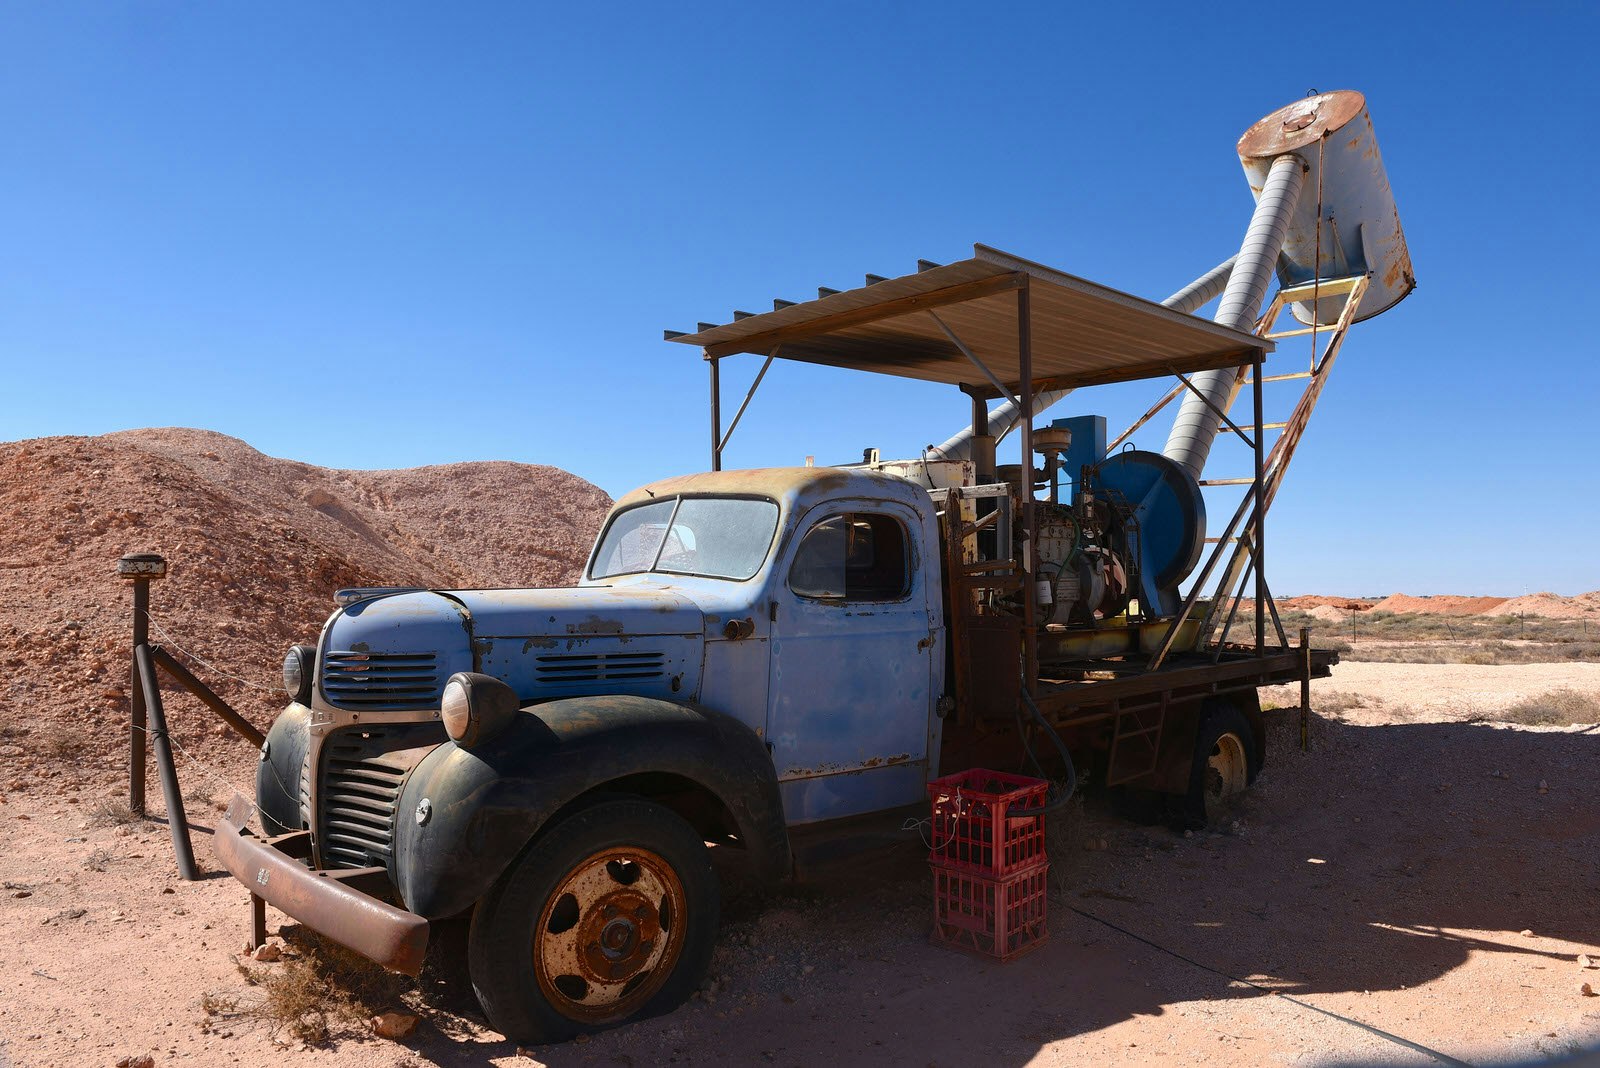 A blower truck used to extract dirt and dust during mining at Coober Pedy in South Australia.